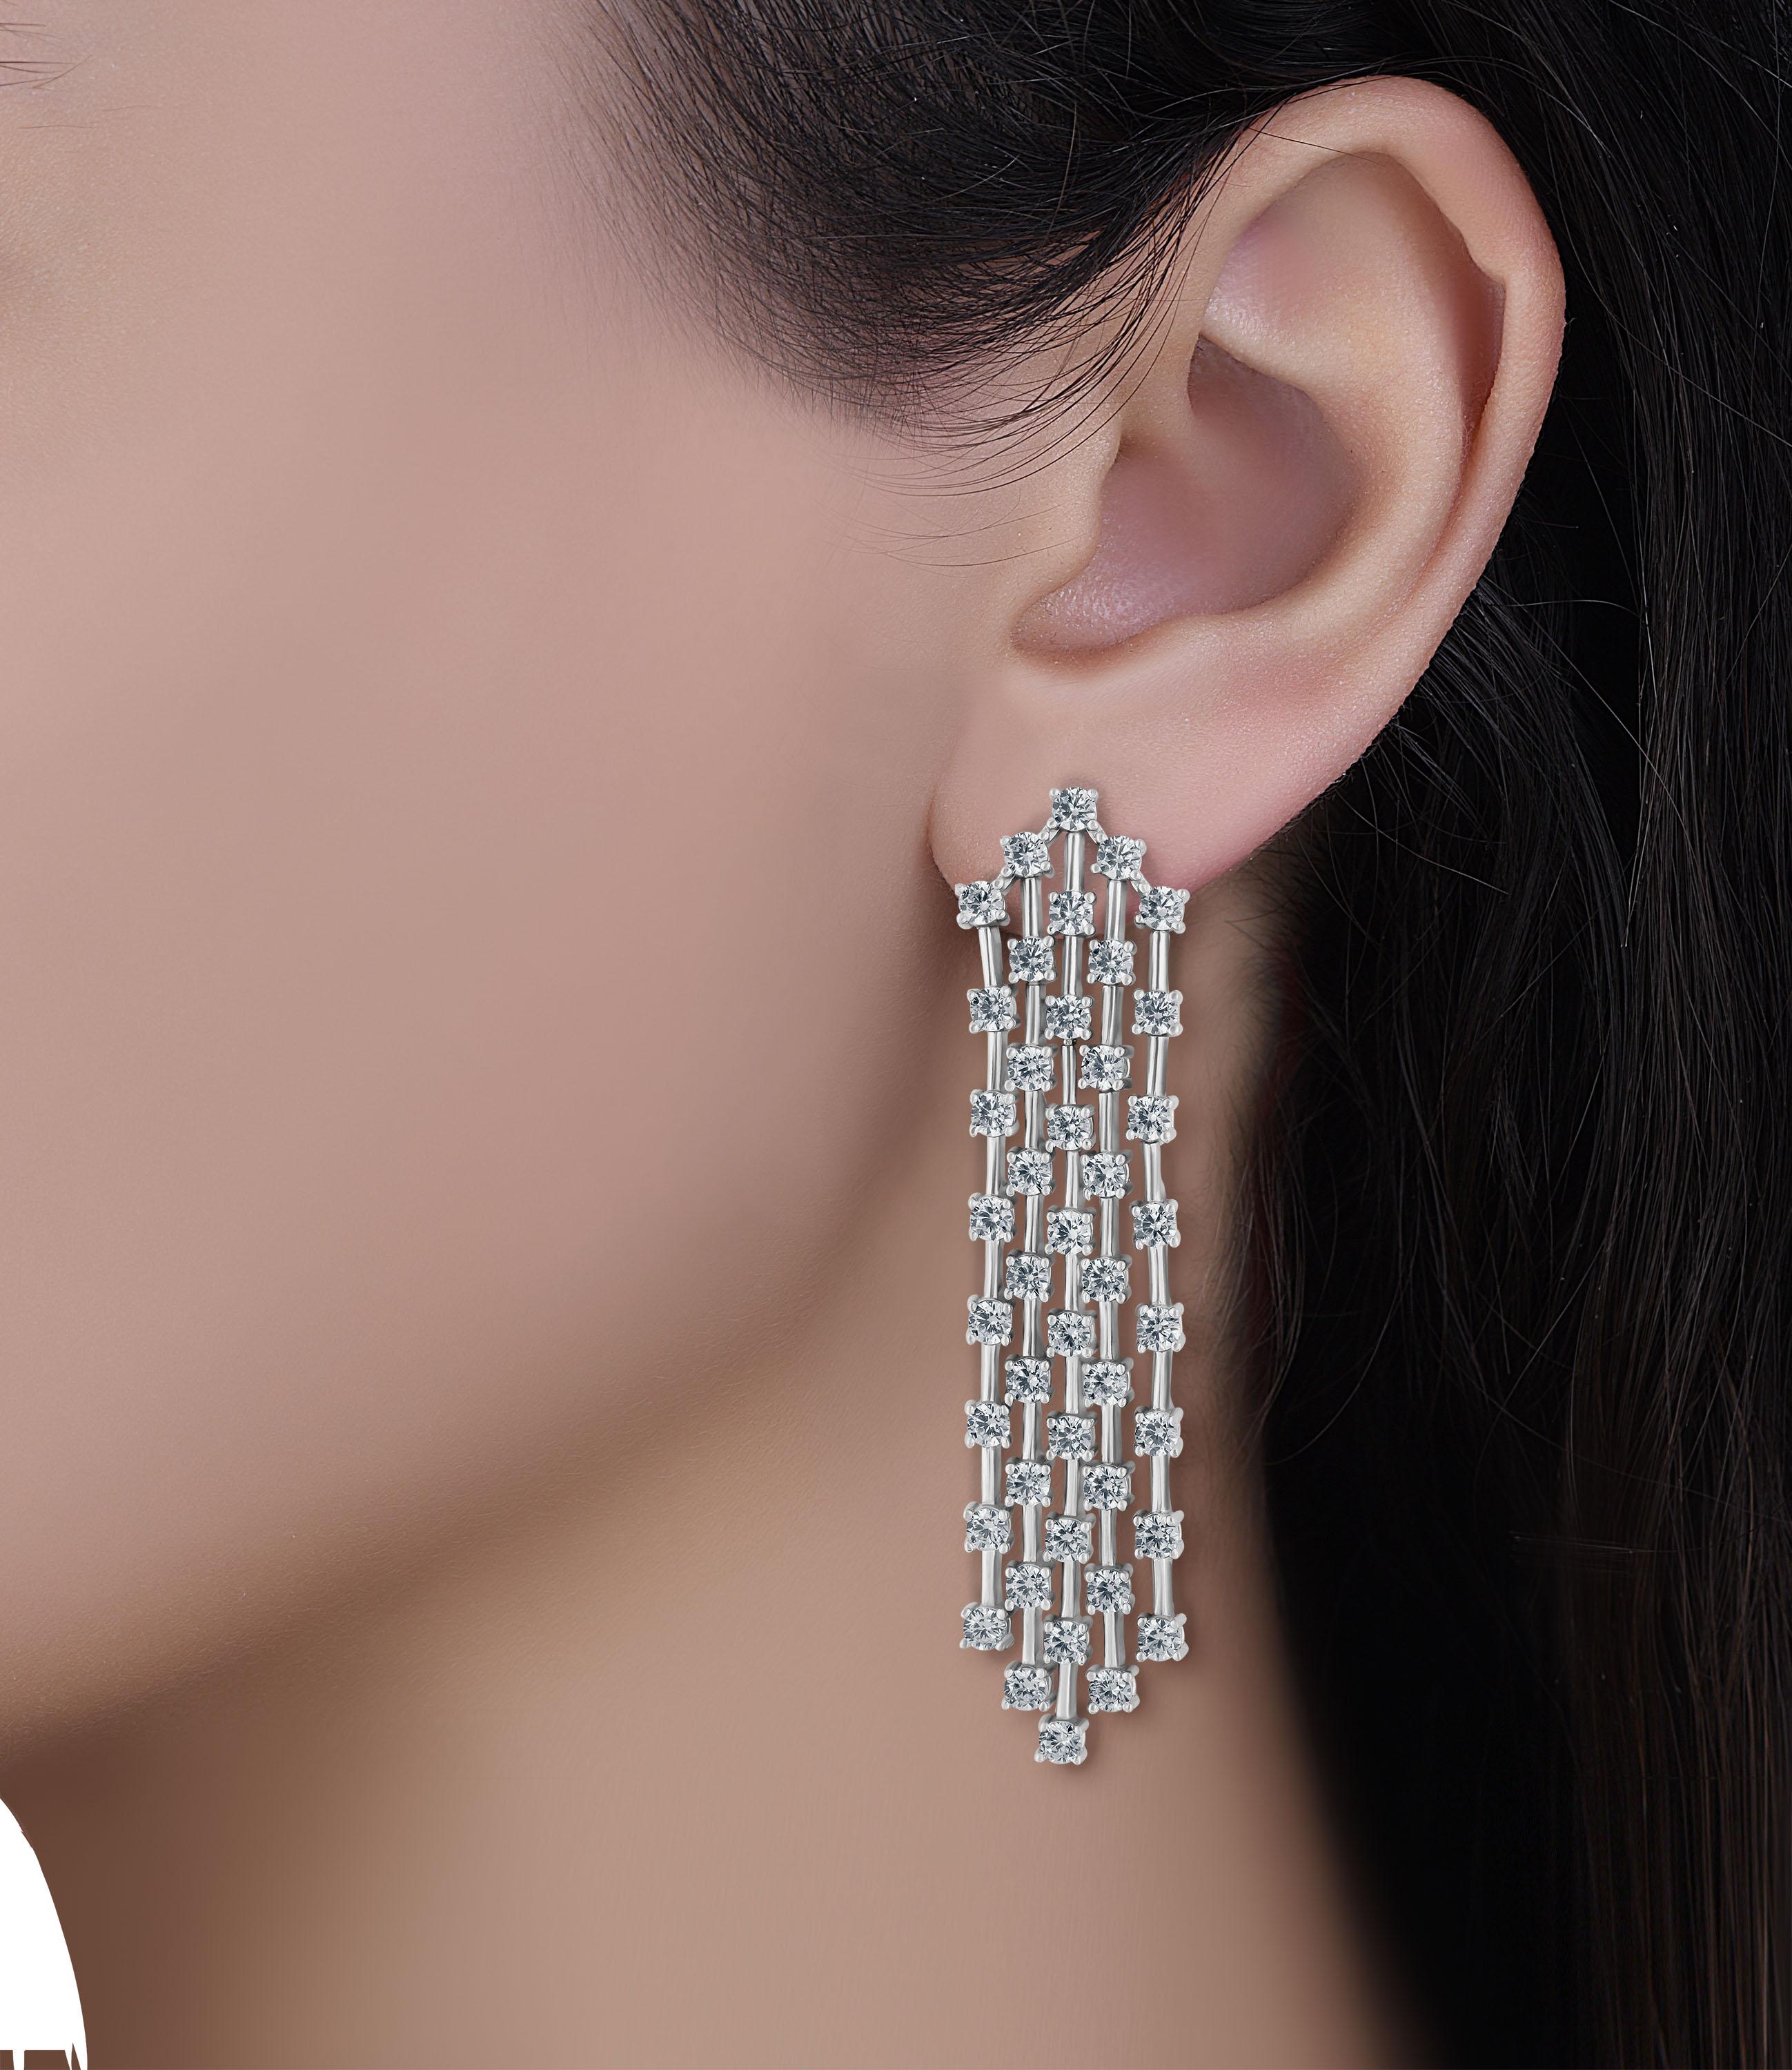 Made in the Emilio Jewelry factory. Earrings Feature 88 diamonds totaling approx 6.20 carats total set in 18k white gold. Available to order in yellow or rose gold. Color F clarity Vs
A complimentary Professional appraisal from AGI included upon